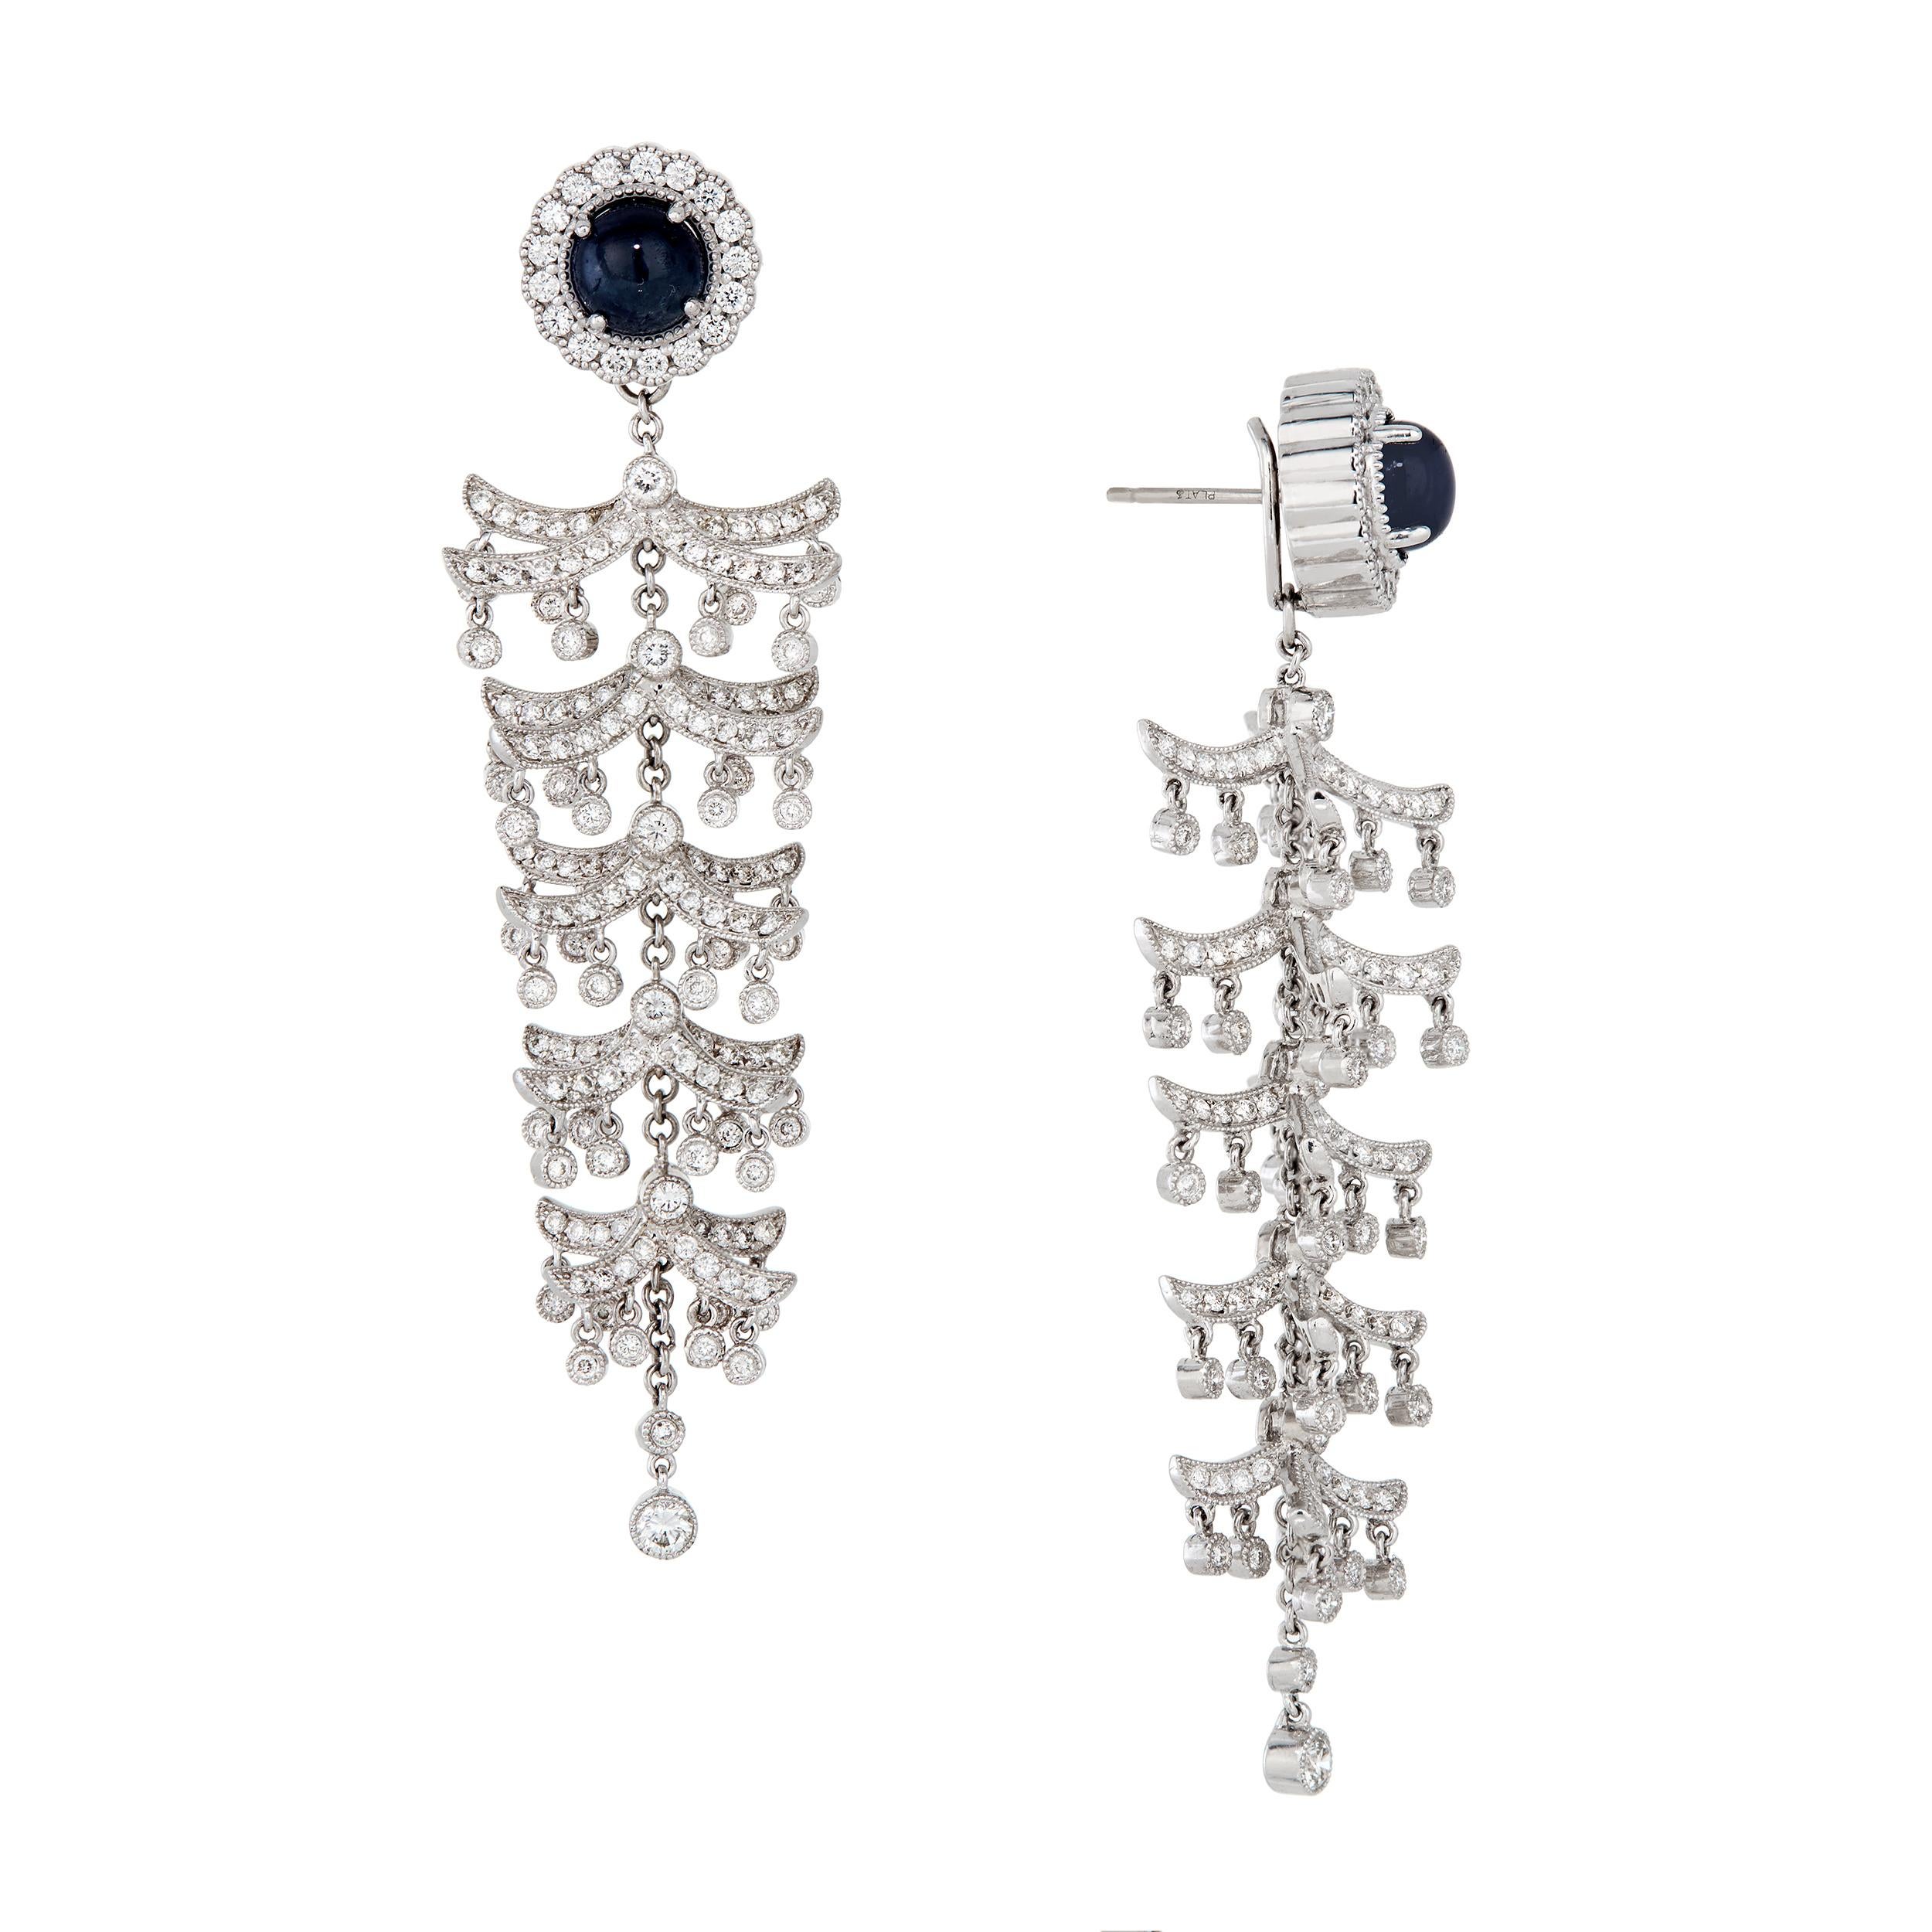 Overall Description:

Computer Aided Design Pagoda Earrings
     •Detachable - stud or dangle options
     
Round Cabochons Sapphires
     •6 mm
     •2.64 Carats total

Platinum Semi-Set 3/8 Carat DWT
     •6 mm openings

Measurements:
     •Stud: